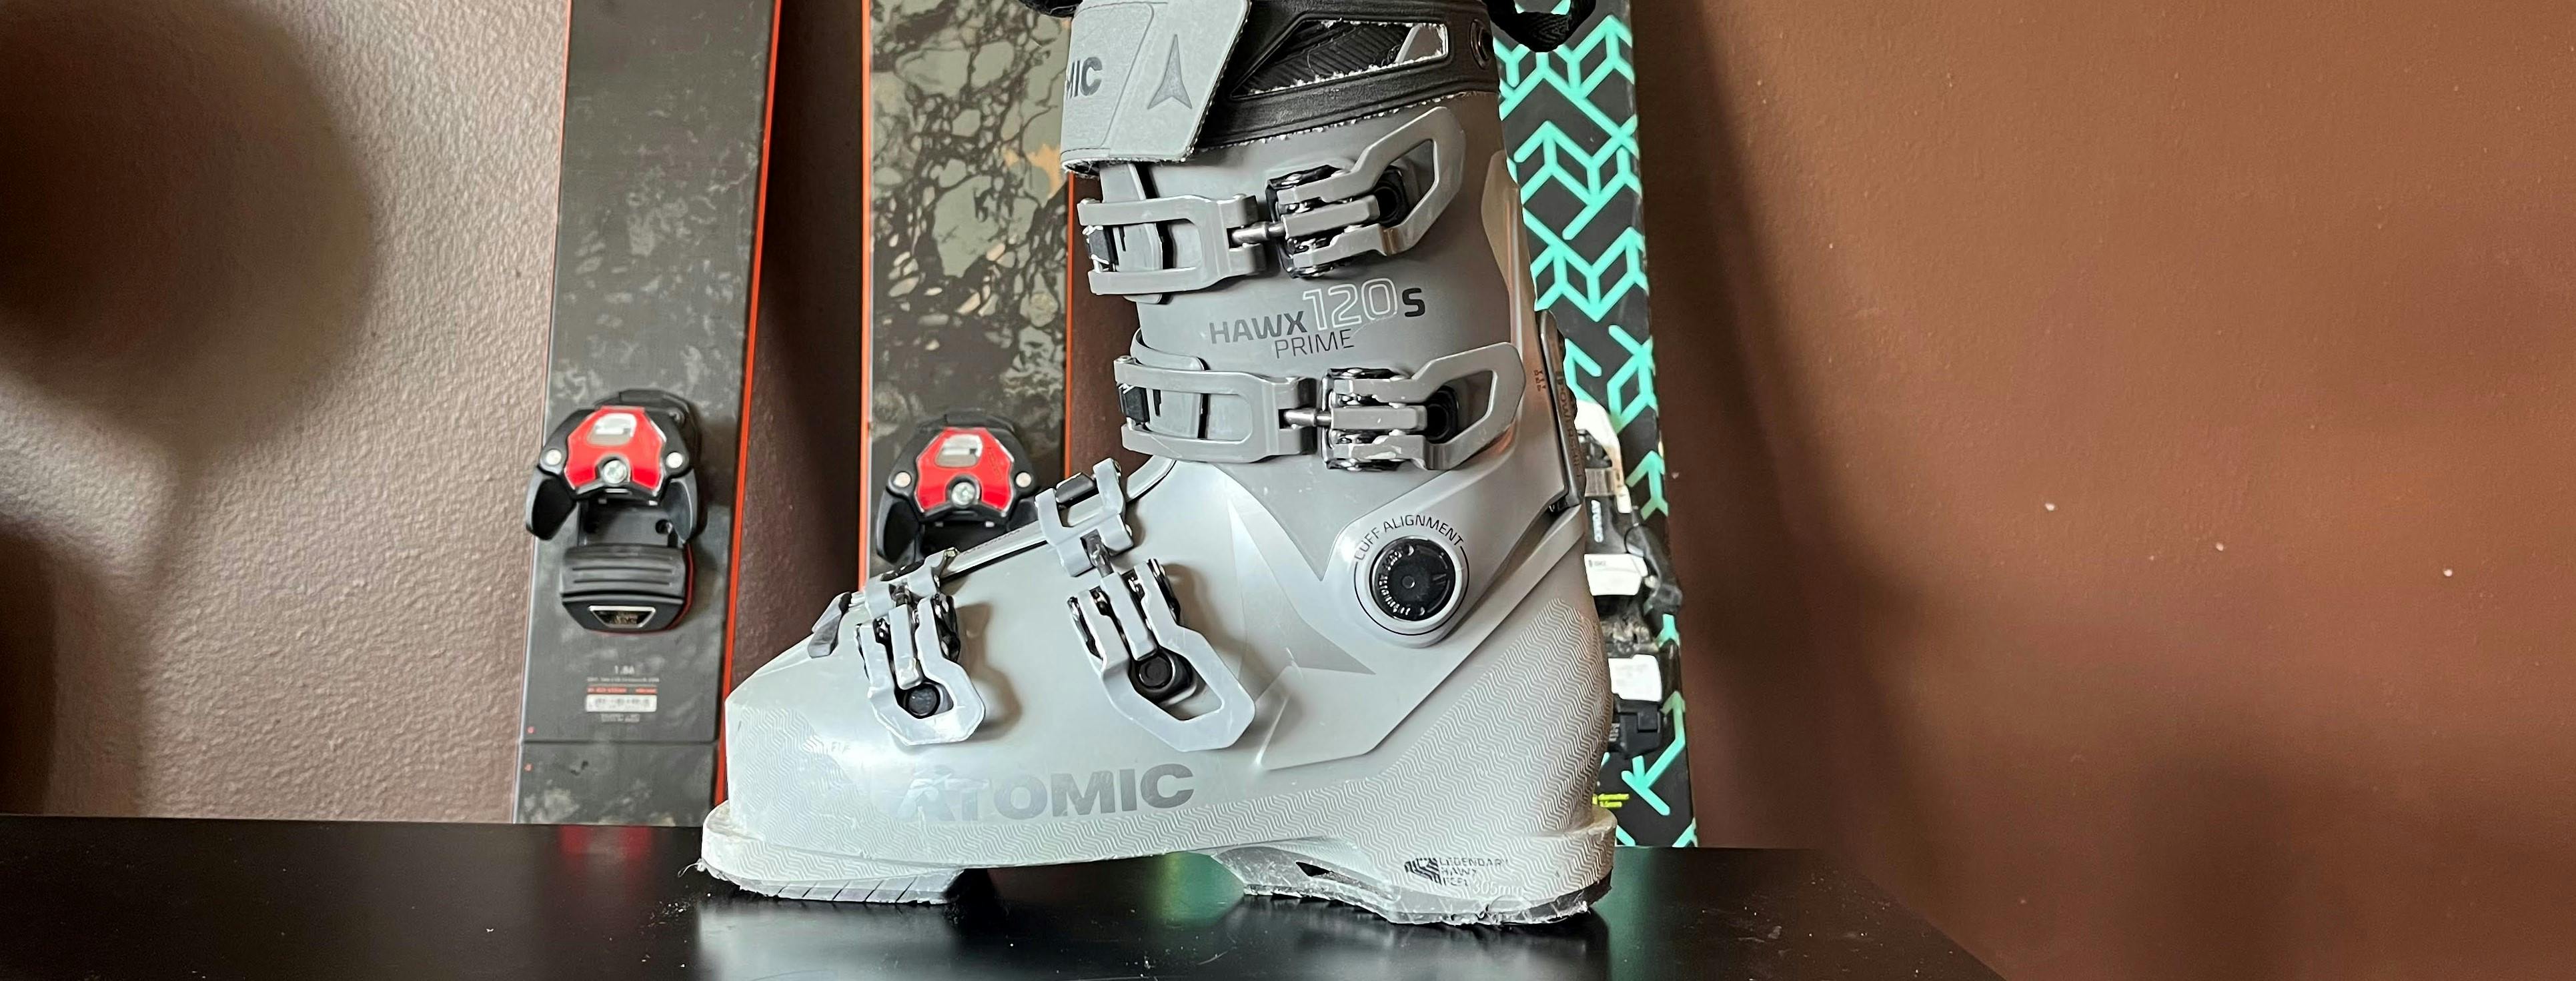 Bestrating Los Indrukwekkend Expert Review: Atomic Hawx Prime 120 S Ski Boots · 2021 | Curated.com